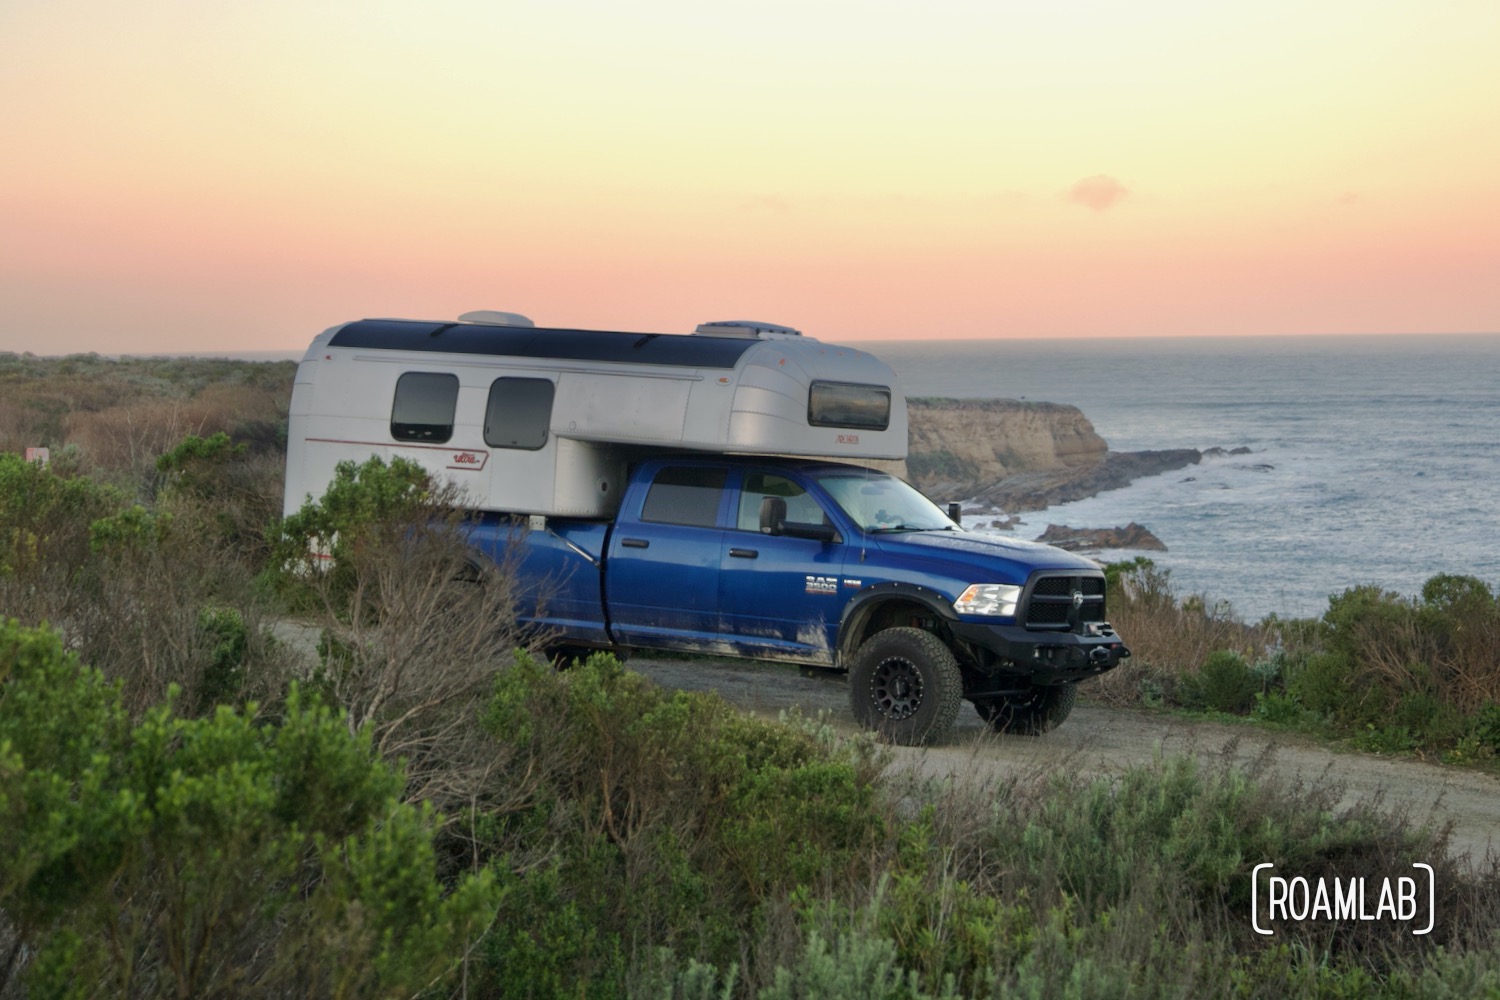 1970 Avion C11 truck camper on a paved road with the Montaña de Oro State Park coastline at sunrise in the background.